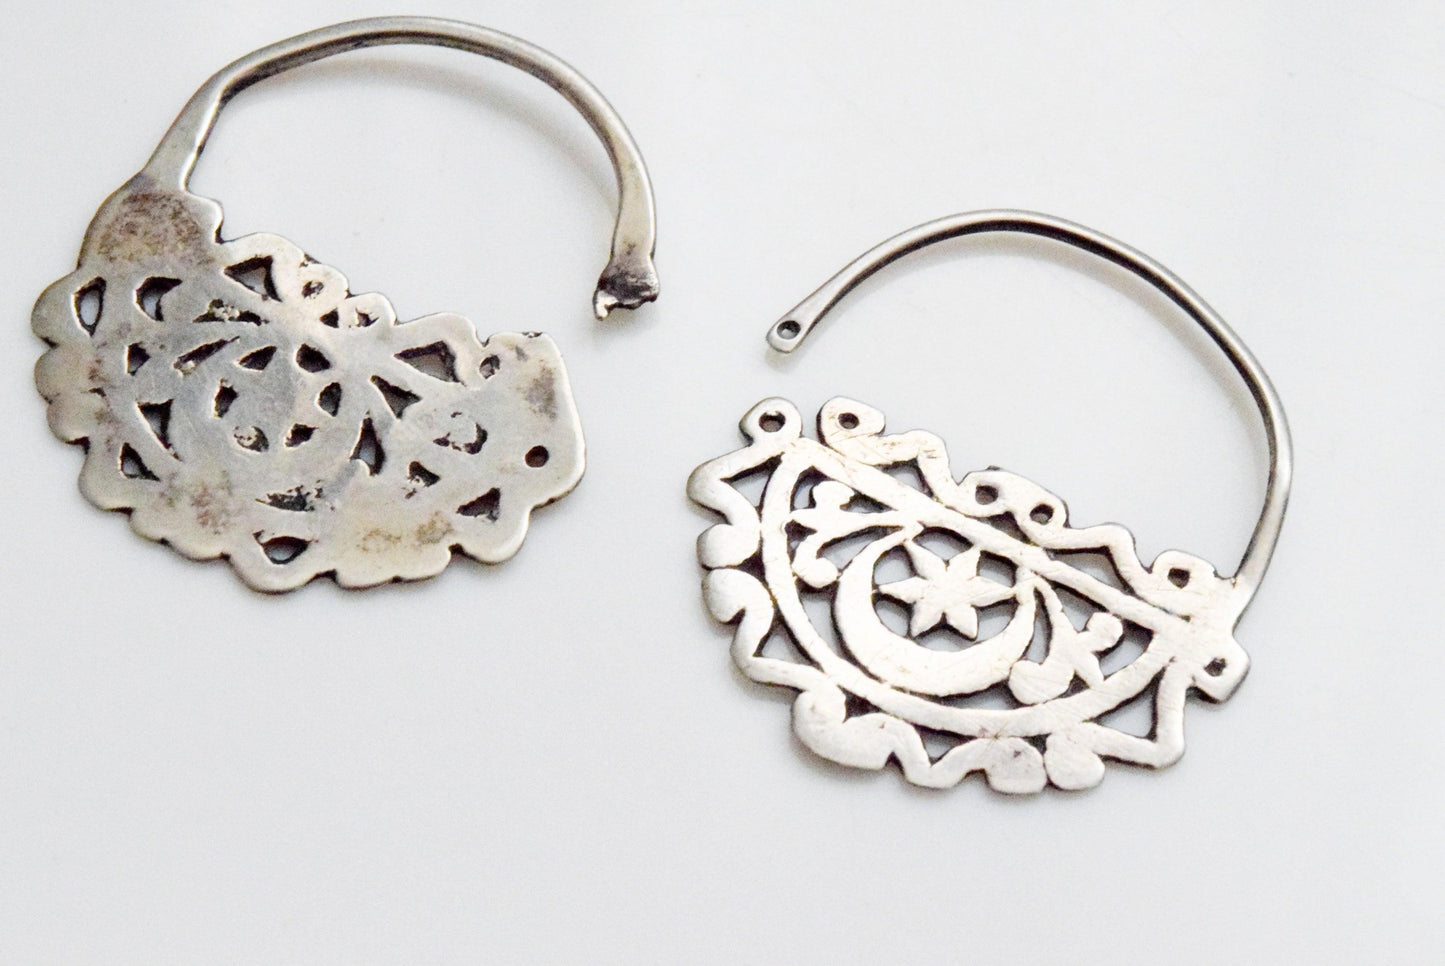 Vintage Small Tunisian Silver Hoop Earrings with Crescent and Star - Anteeka